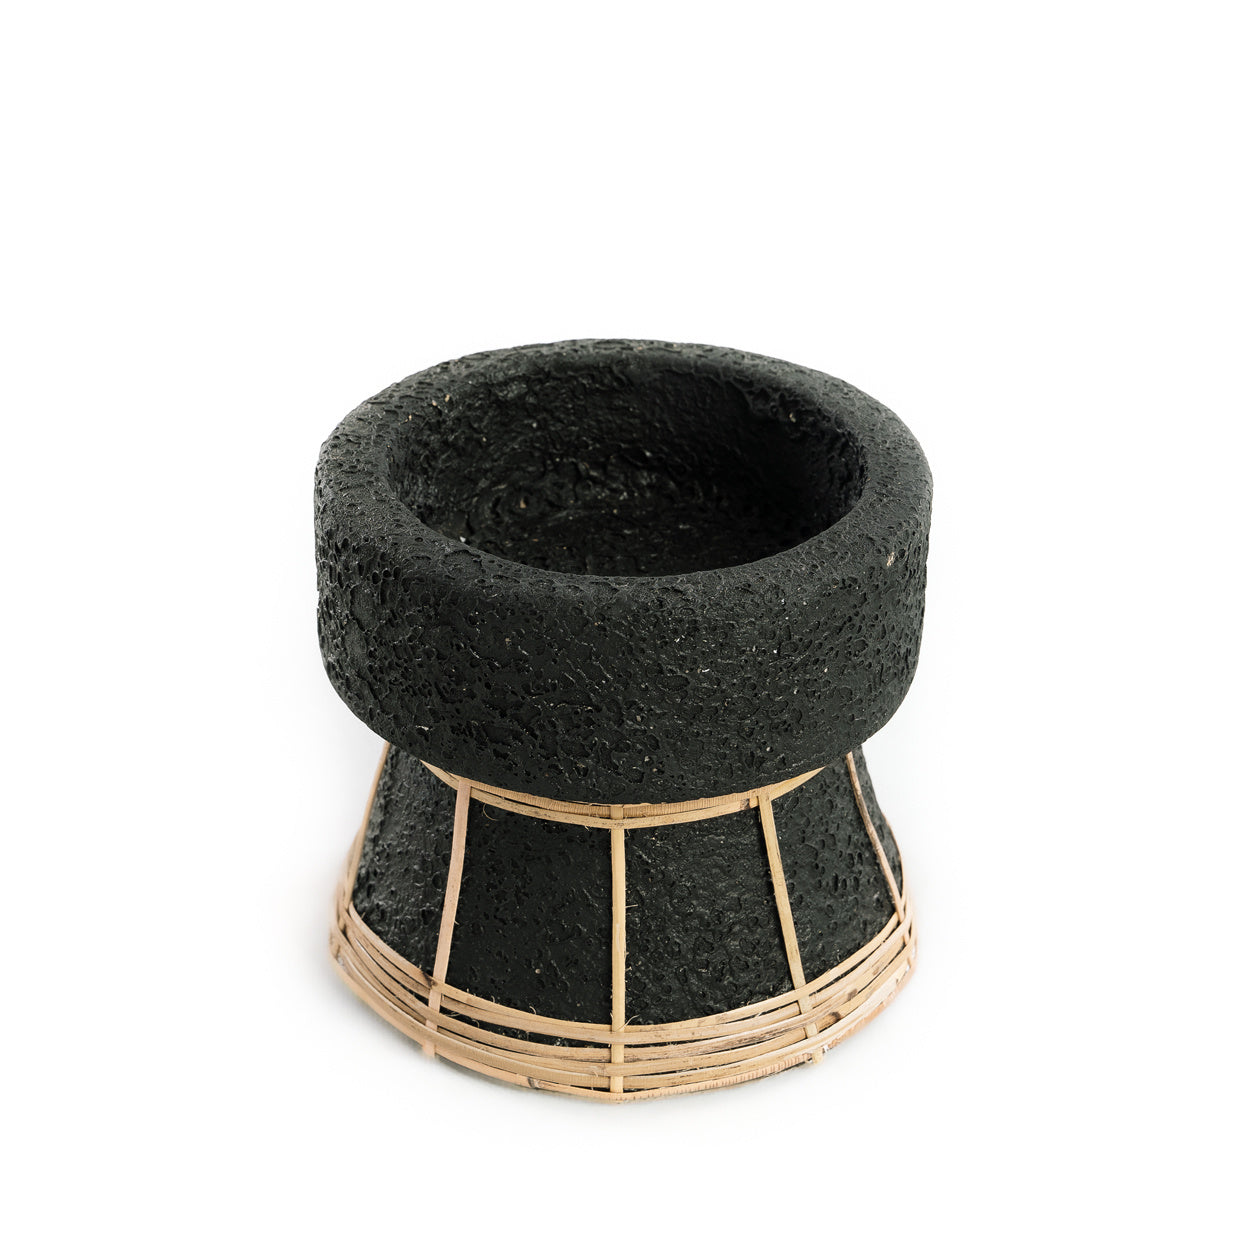 THE SERENE Candle Holder - Black Natural Small Size